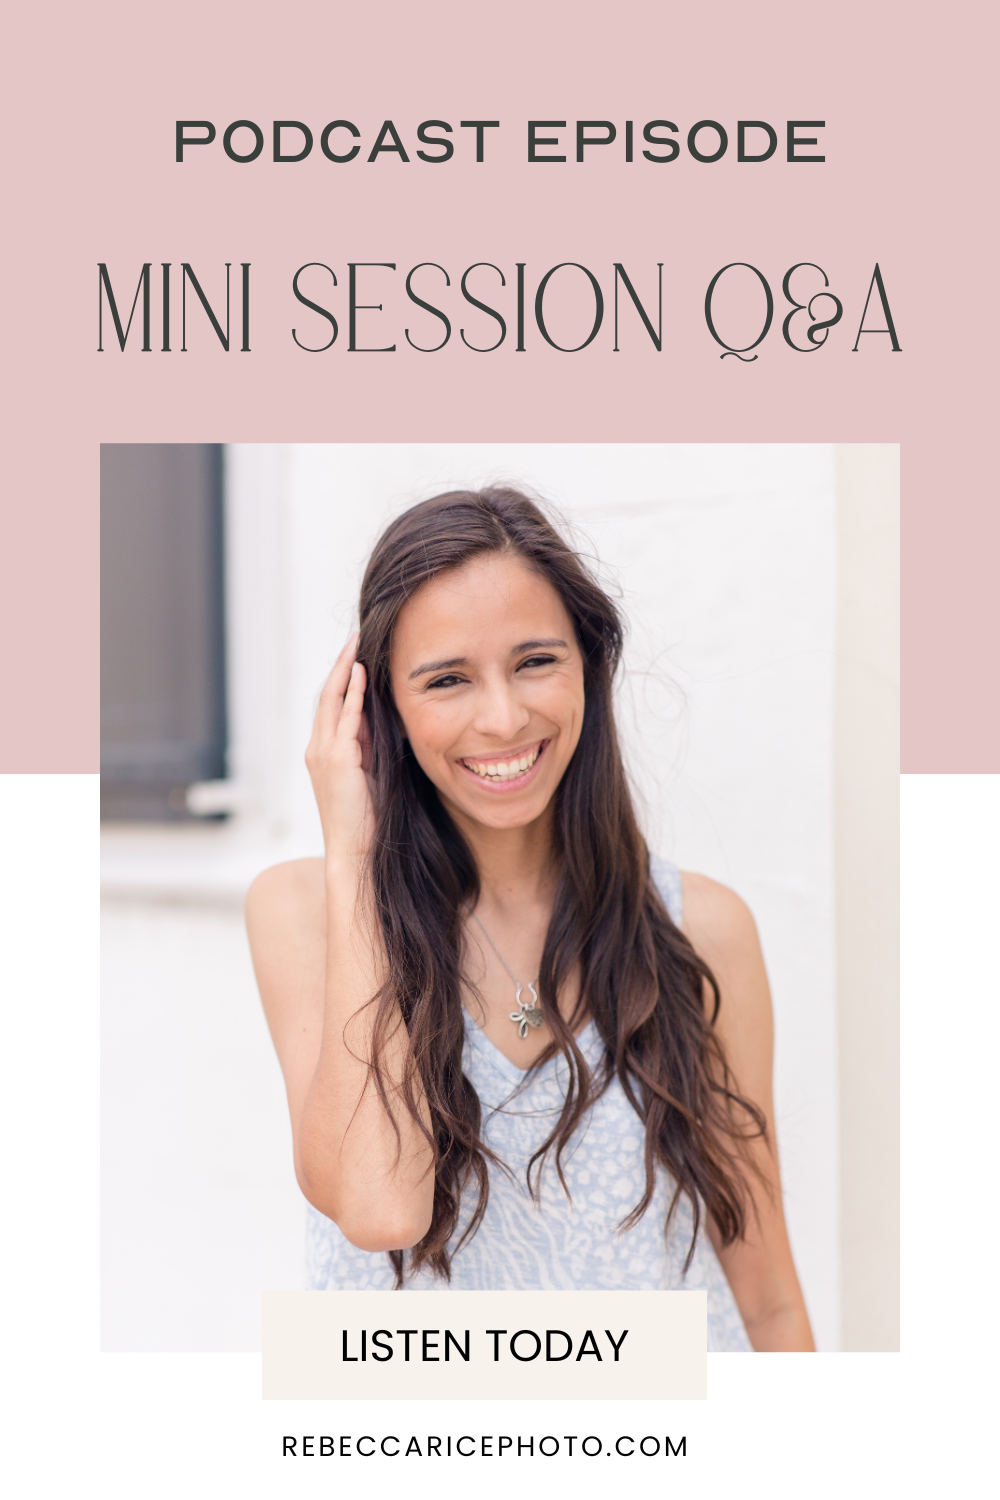 Answering Mini Sessions Questions on the Business Journey Podcast with Rebecca Rice TODAY! -rebeccaricephoto.com